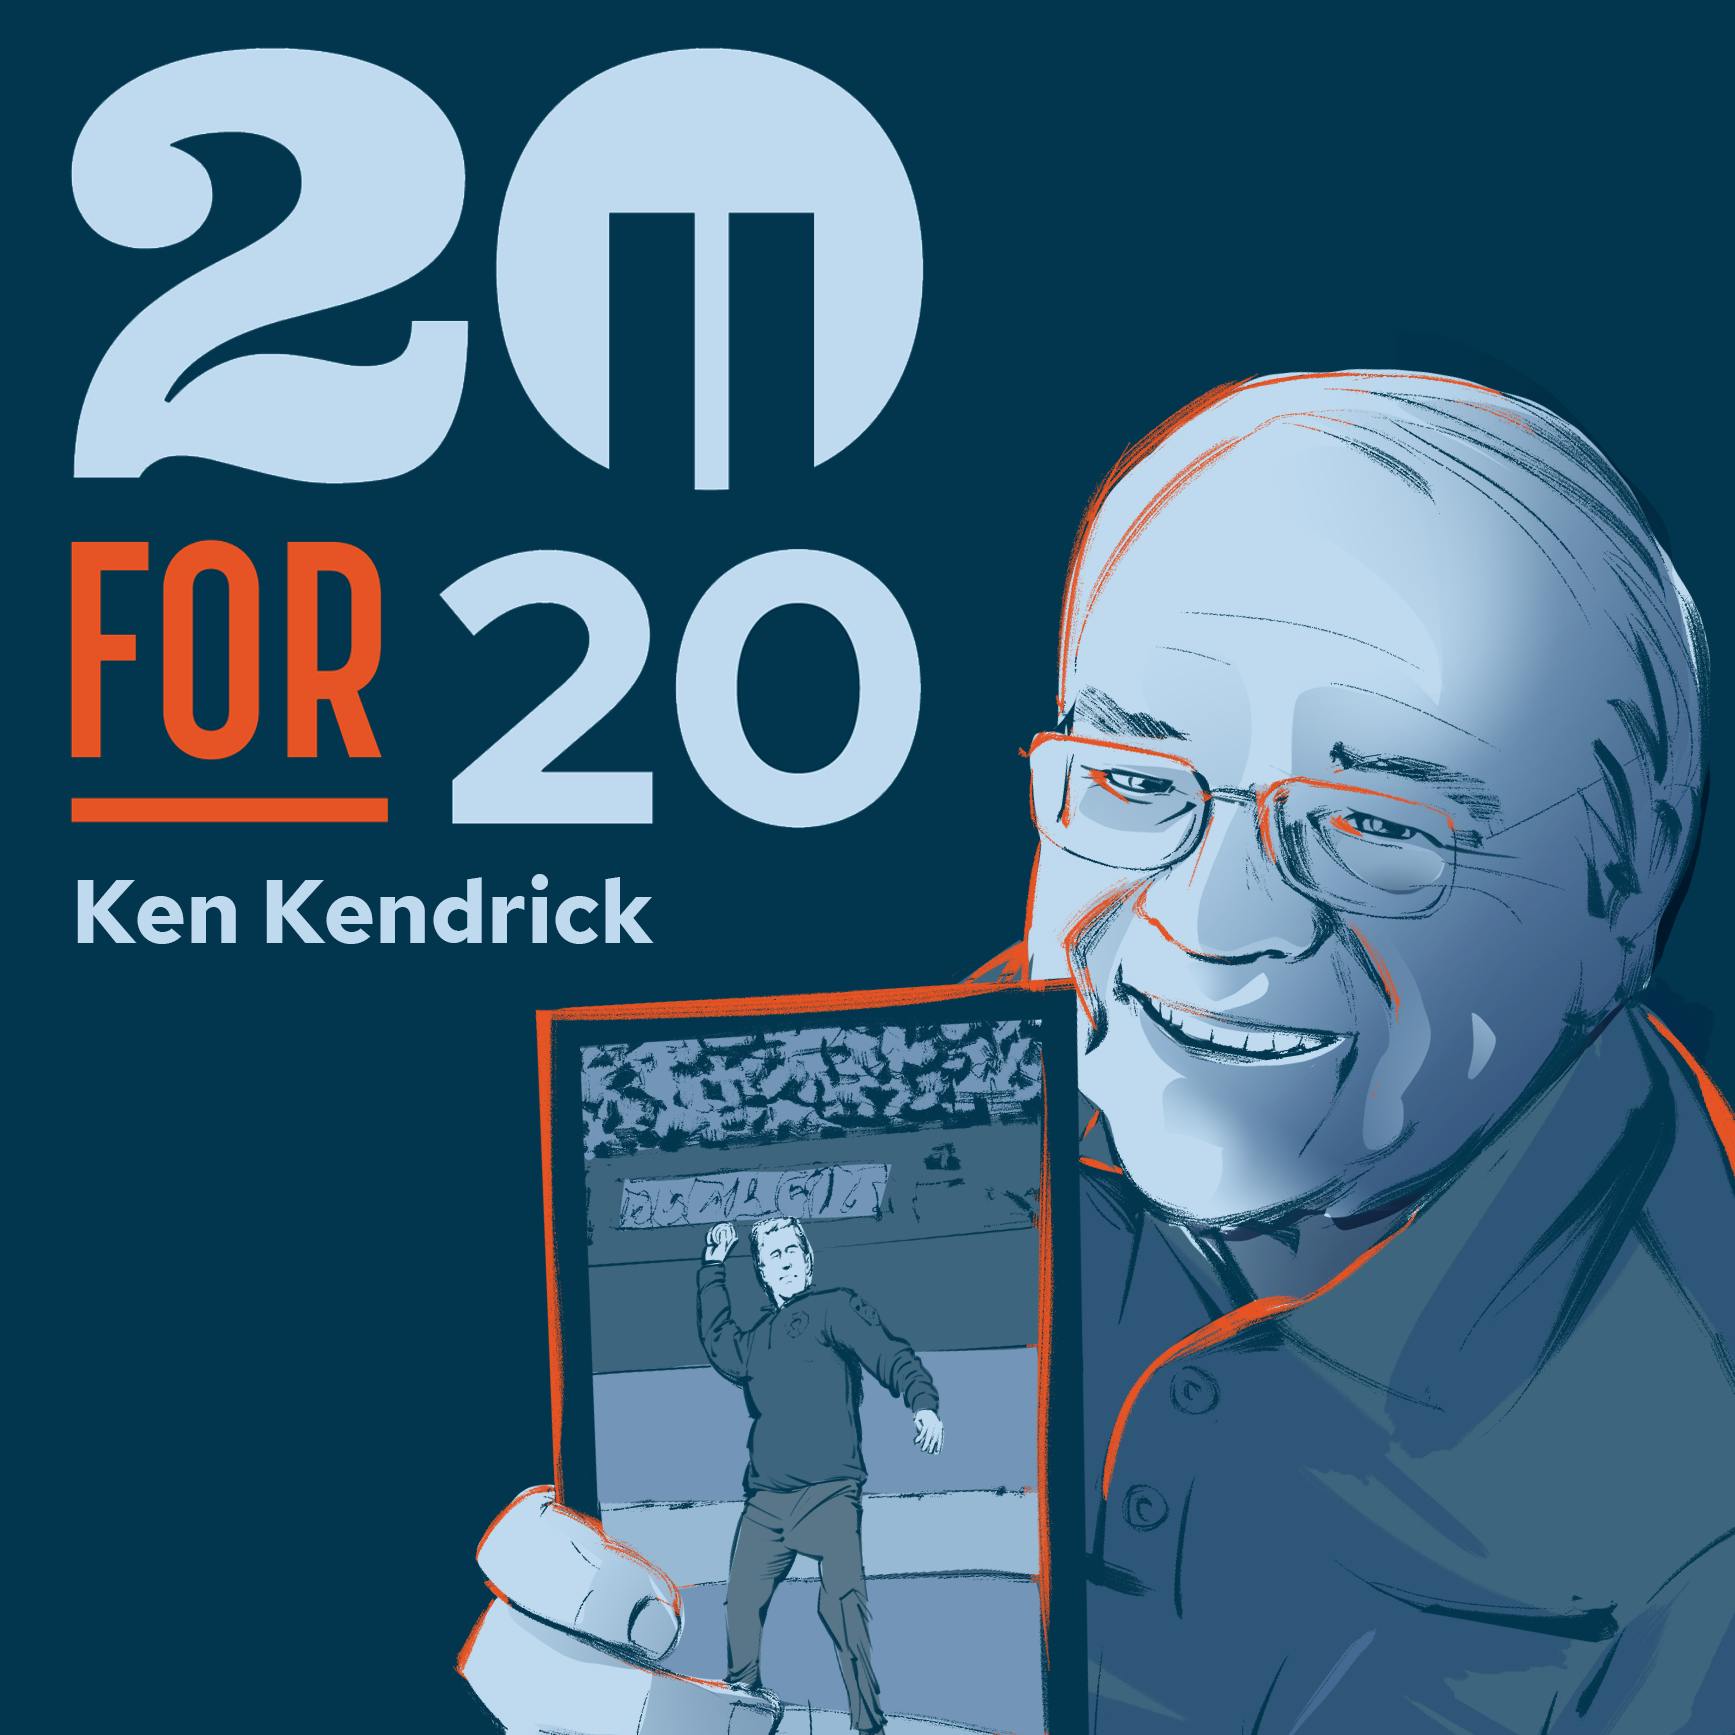 Ken Kendrick: How The President's First Pitch And Baseball Helped With Healing